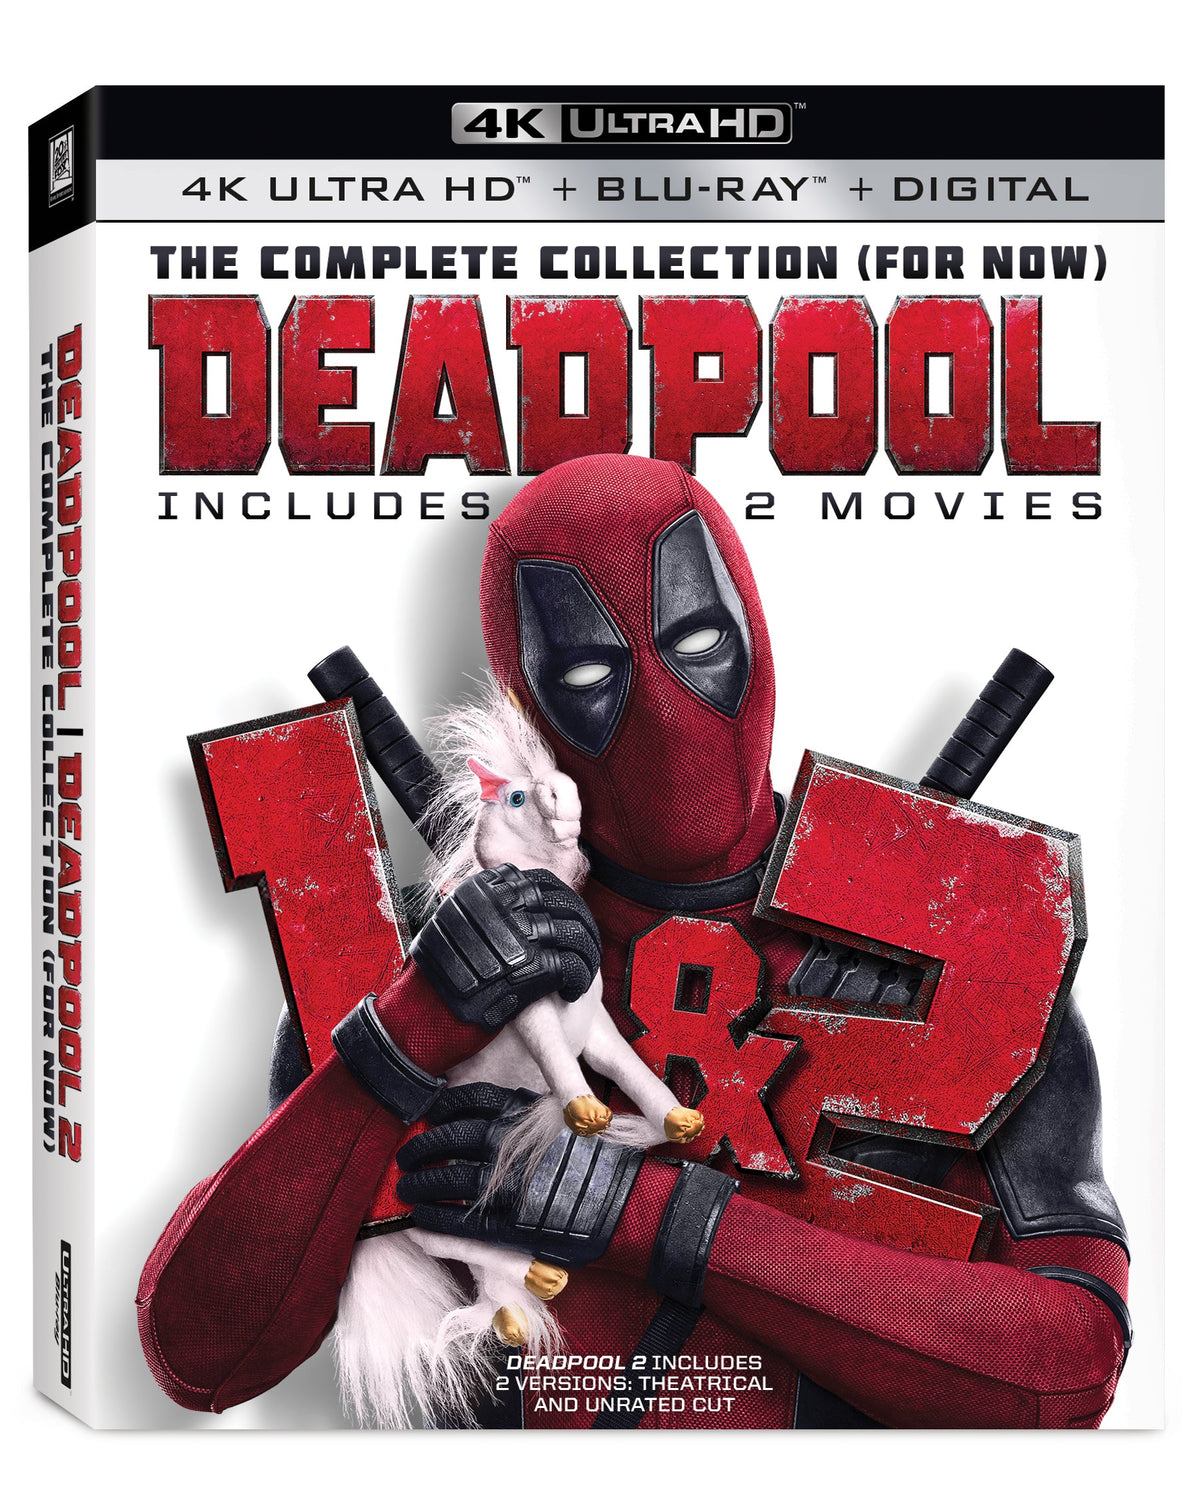 Deadpool: The Complete Collection (For Now) 4K Ultra HD + Blu-Ray + Digital